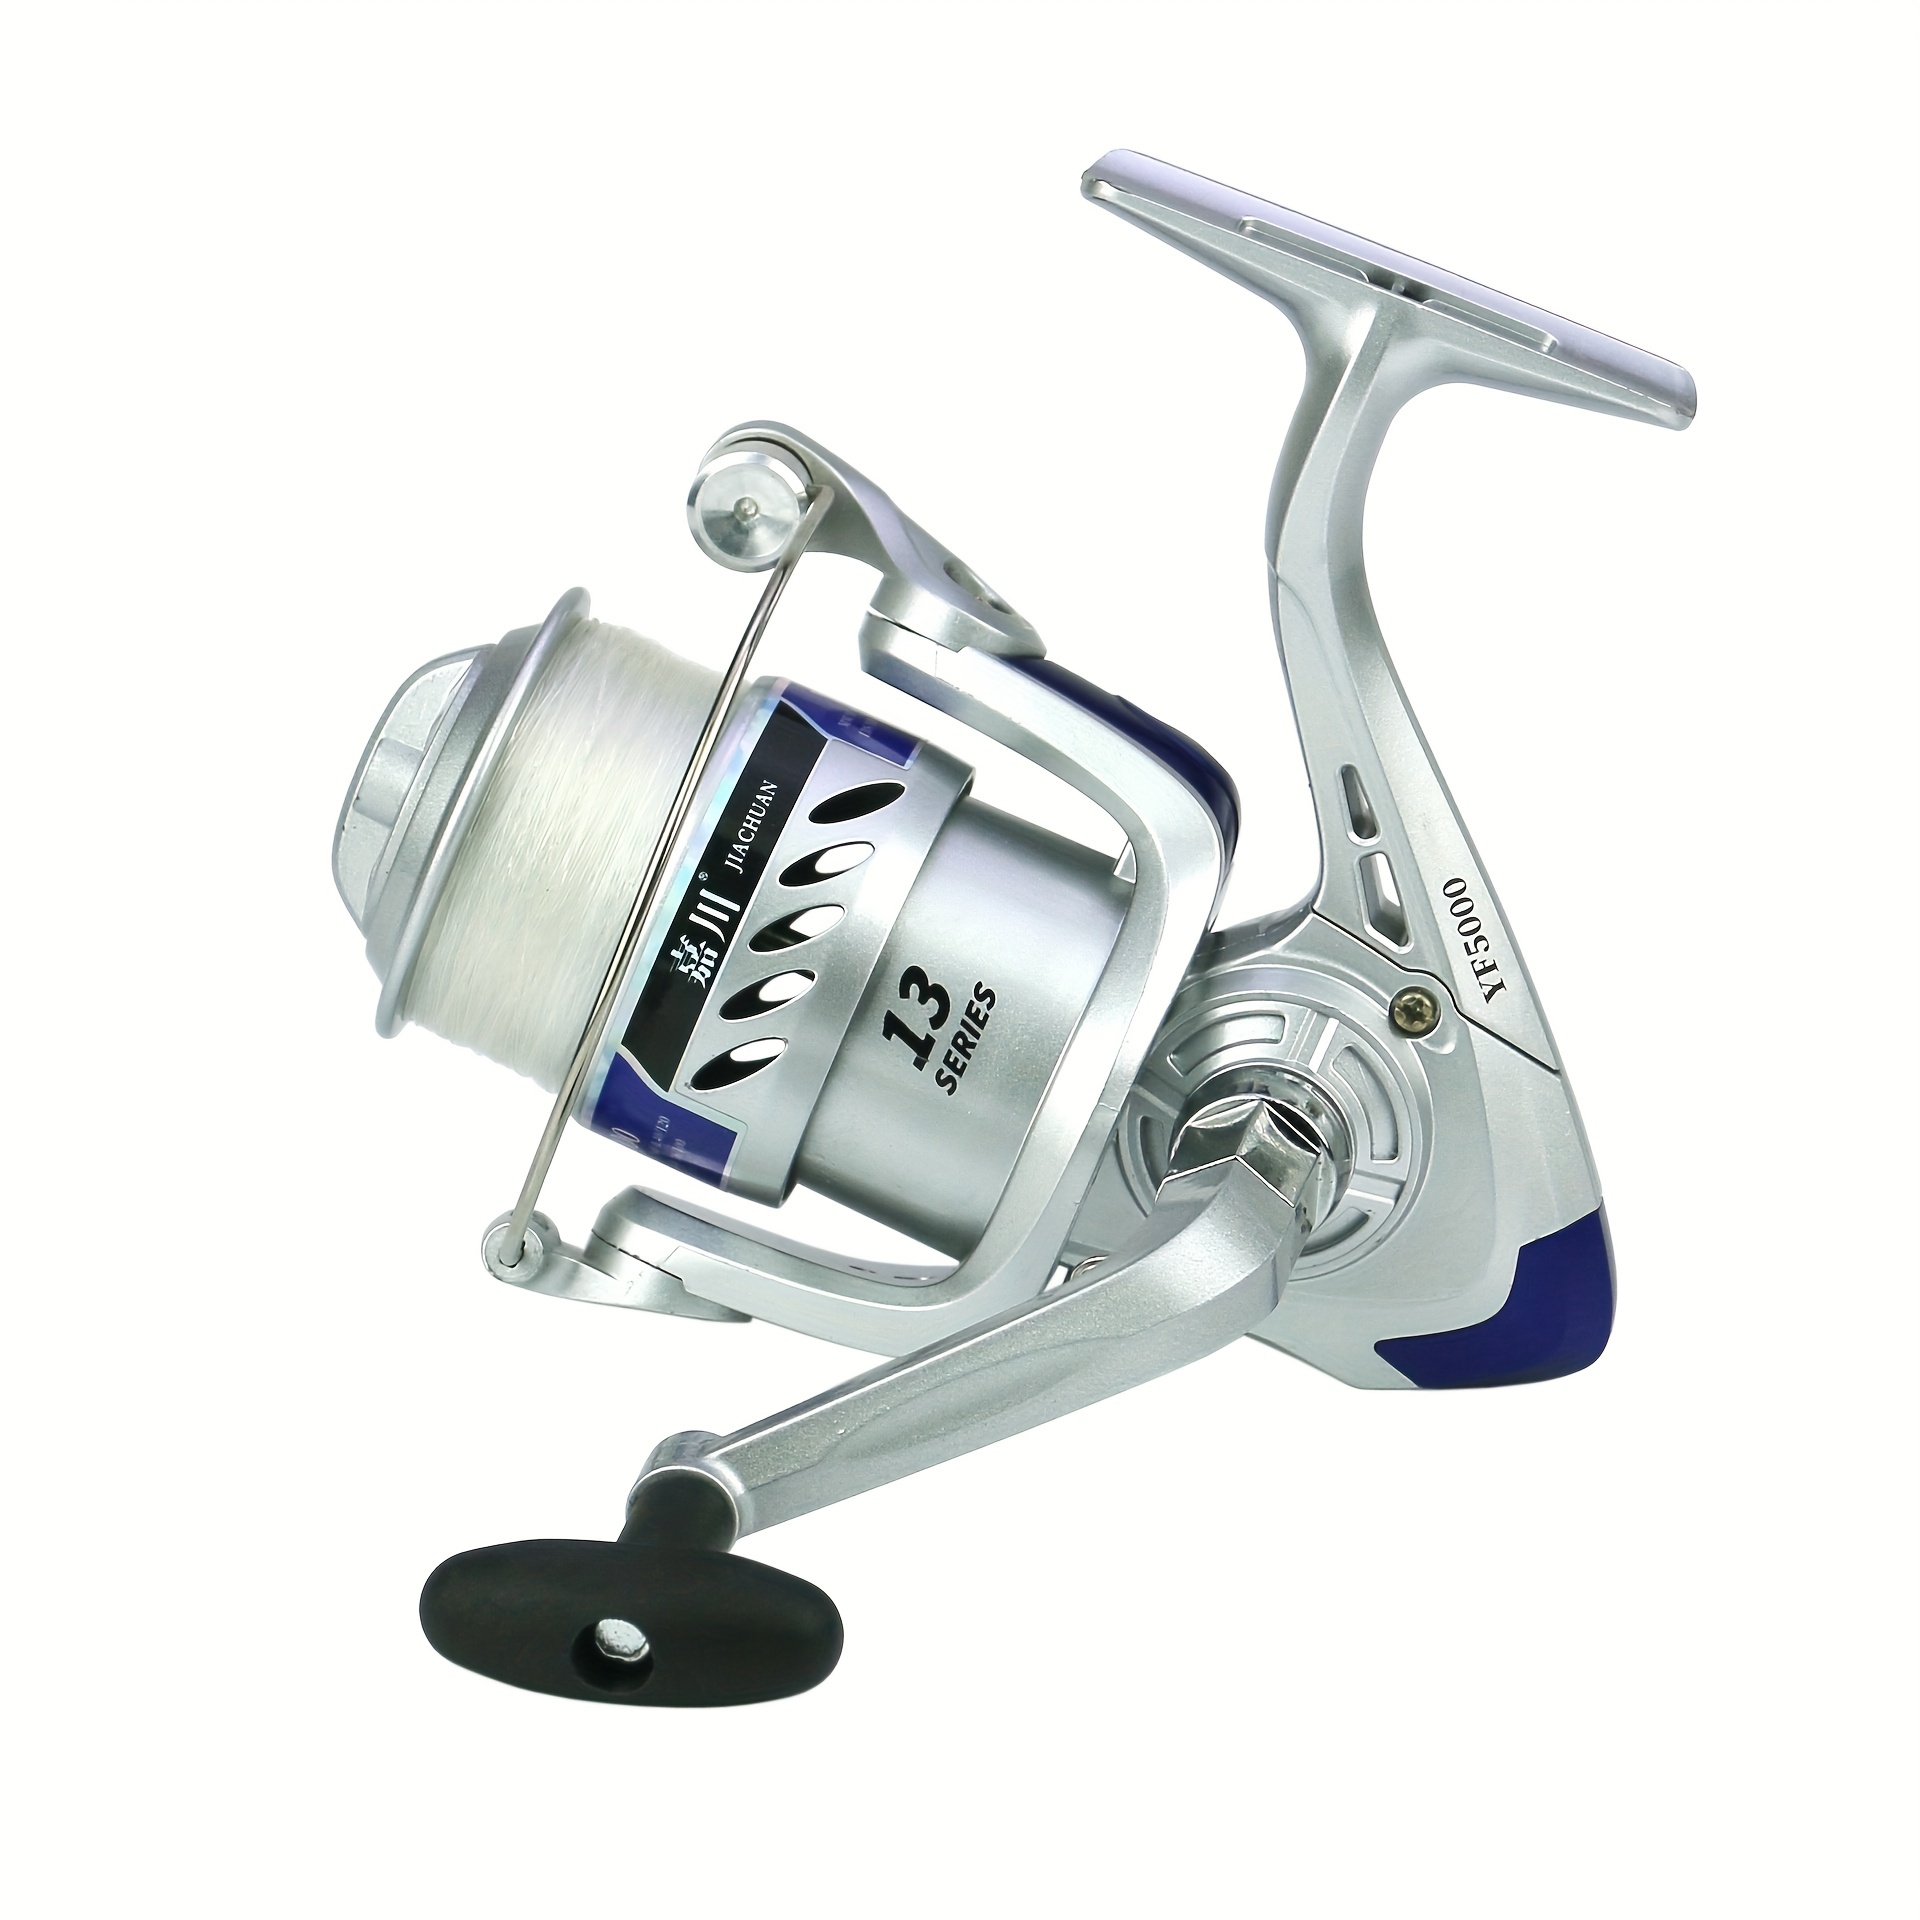  YCDJCS Spinning Reel Full Metal Body 4000/5000 Series Fishing  Reels 6.2:1 High Speed Ratio 11+1 Durable Stainless Steel Bearings  Saltwater & Freshwater Reels (Color : Green, Size : 4000) : Sports &  Outdoors